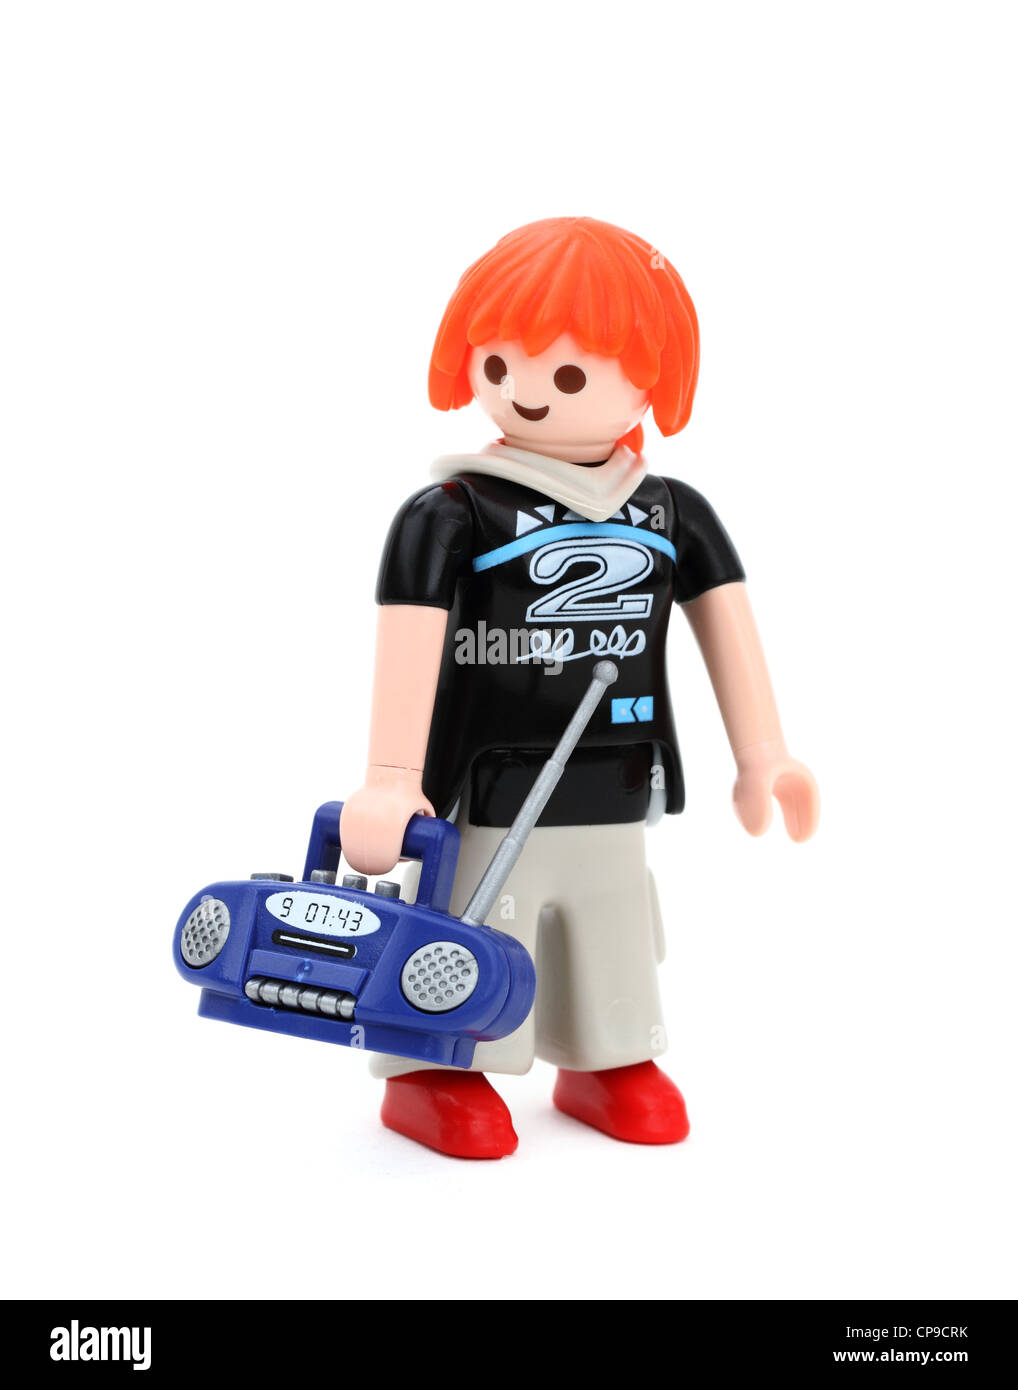 Playmobil toy figure of a teen girl with red hair carrying a radio Stock  Photo - Alamy